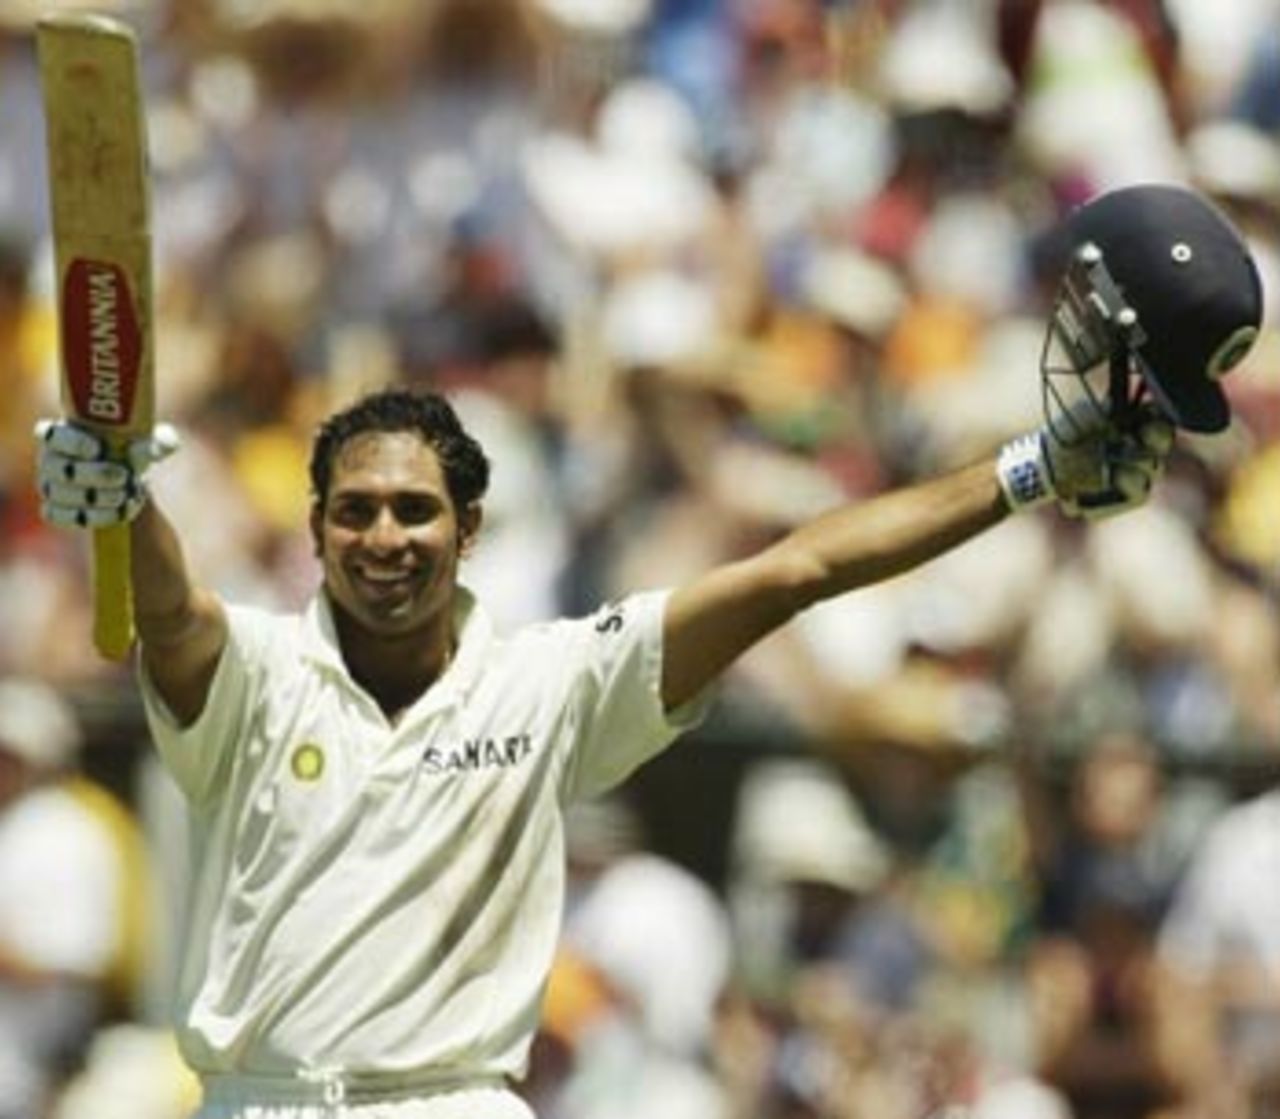 It's celebration time for VVS Laxman, as he reaches his second hundred of the series, Australia v India, 4th Test, Sydney, 2nd day, January 3, 2004